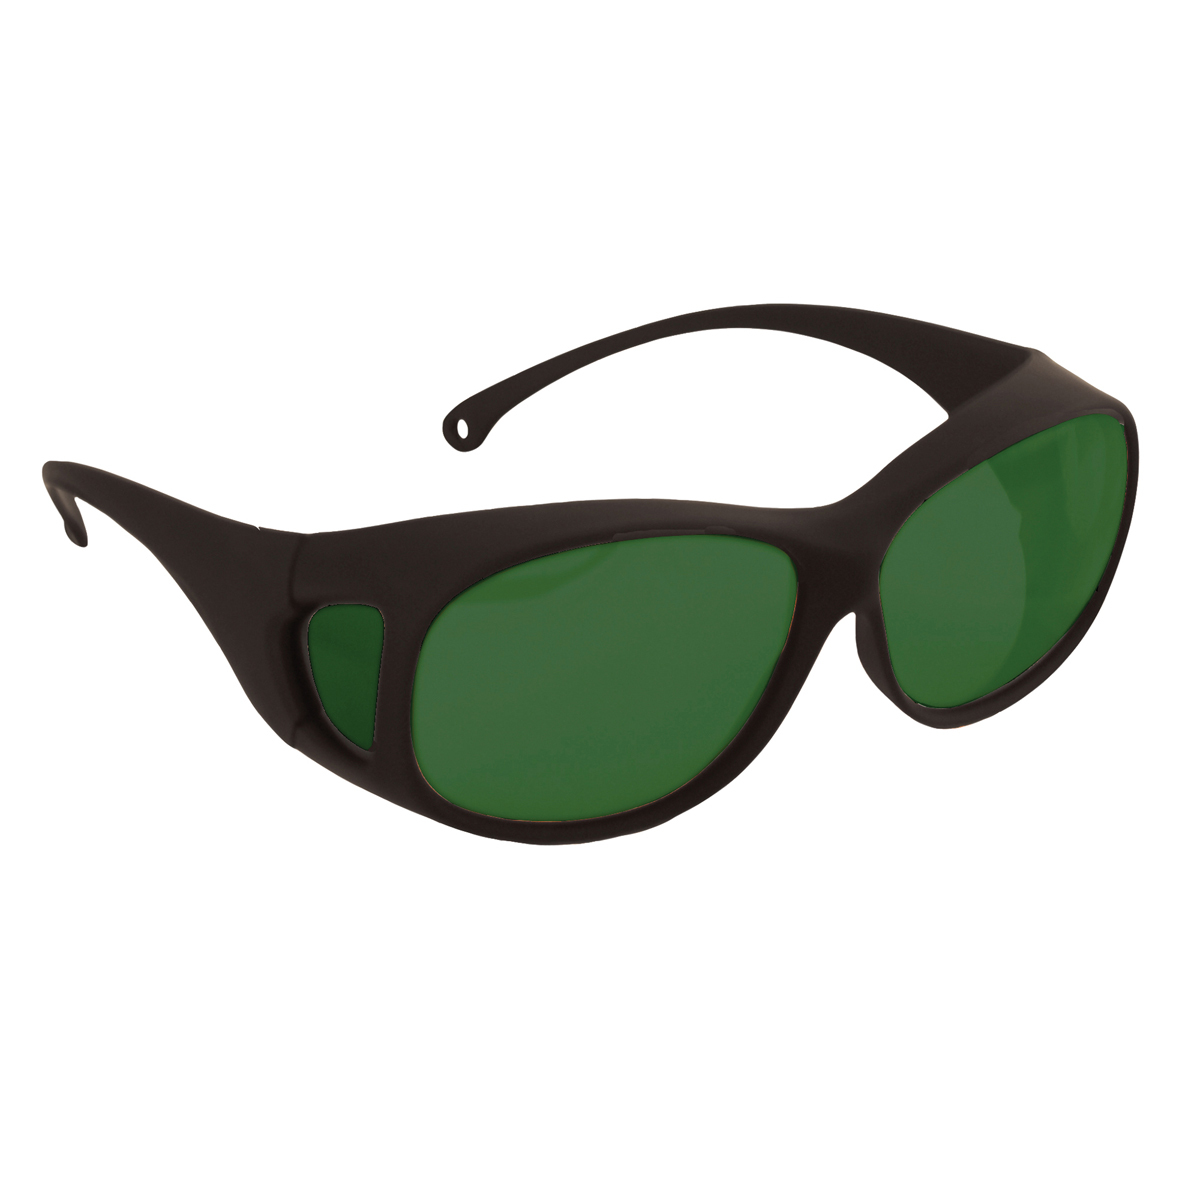 Kimberly-Clark Professional* KleenGuard™ OTG* Black Safety Glasses With Green/Shade 5 IRUV Hard Coat Lens (Availability restrict